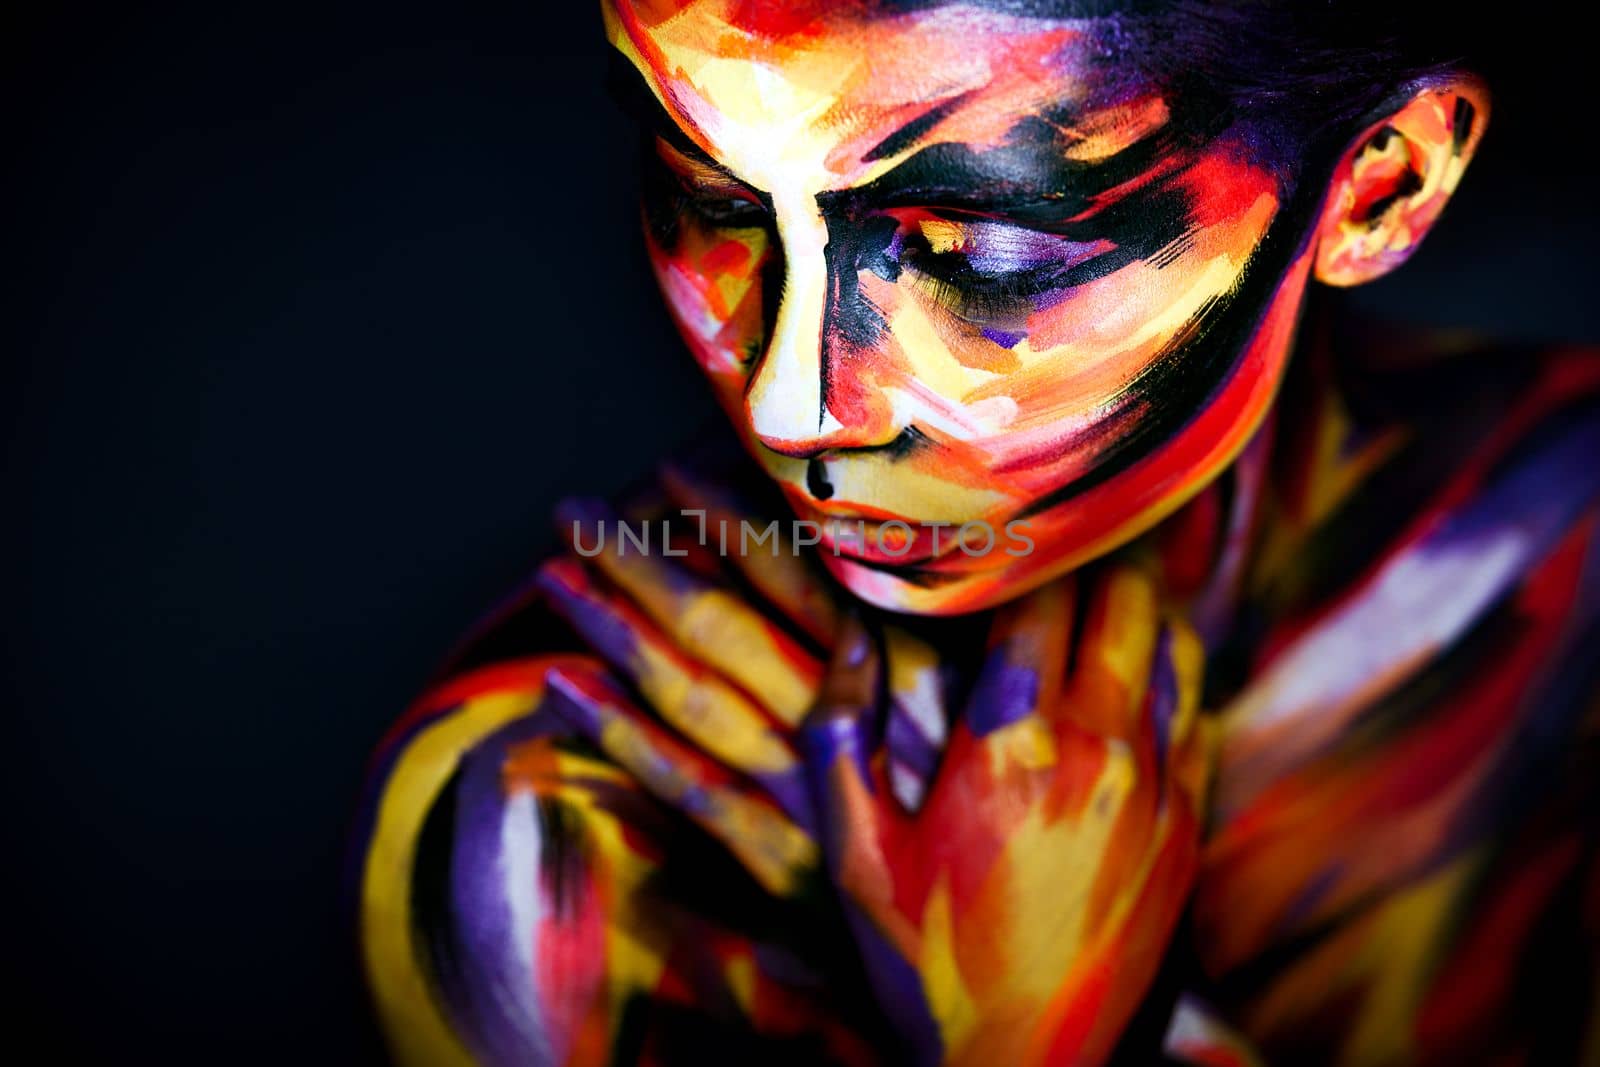 Portrait of the bright beautiful girl with art colorful make-up and bodyart by MikeOrlov